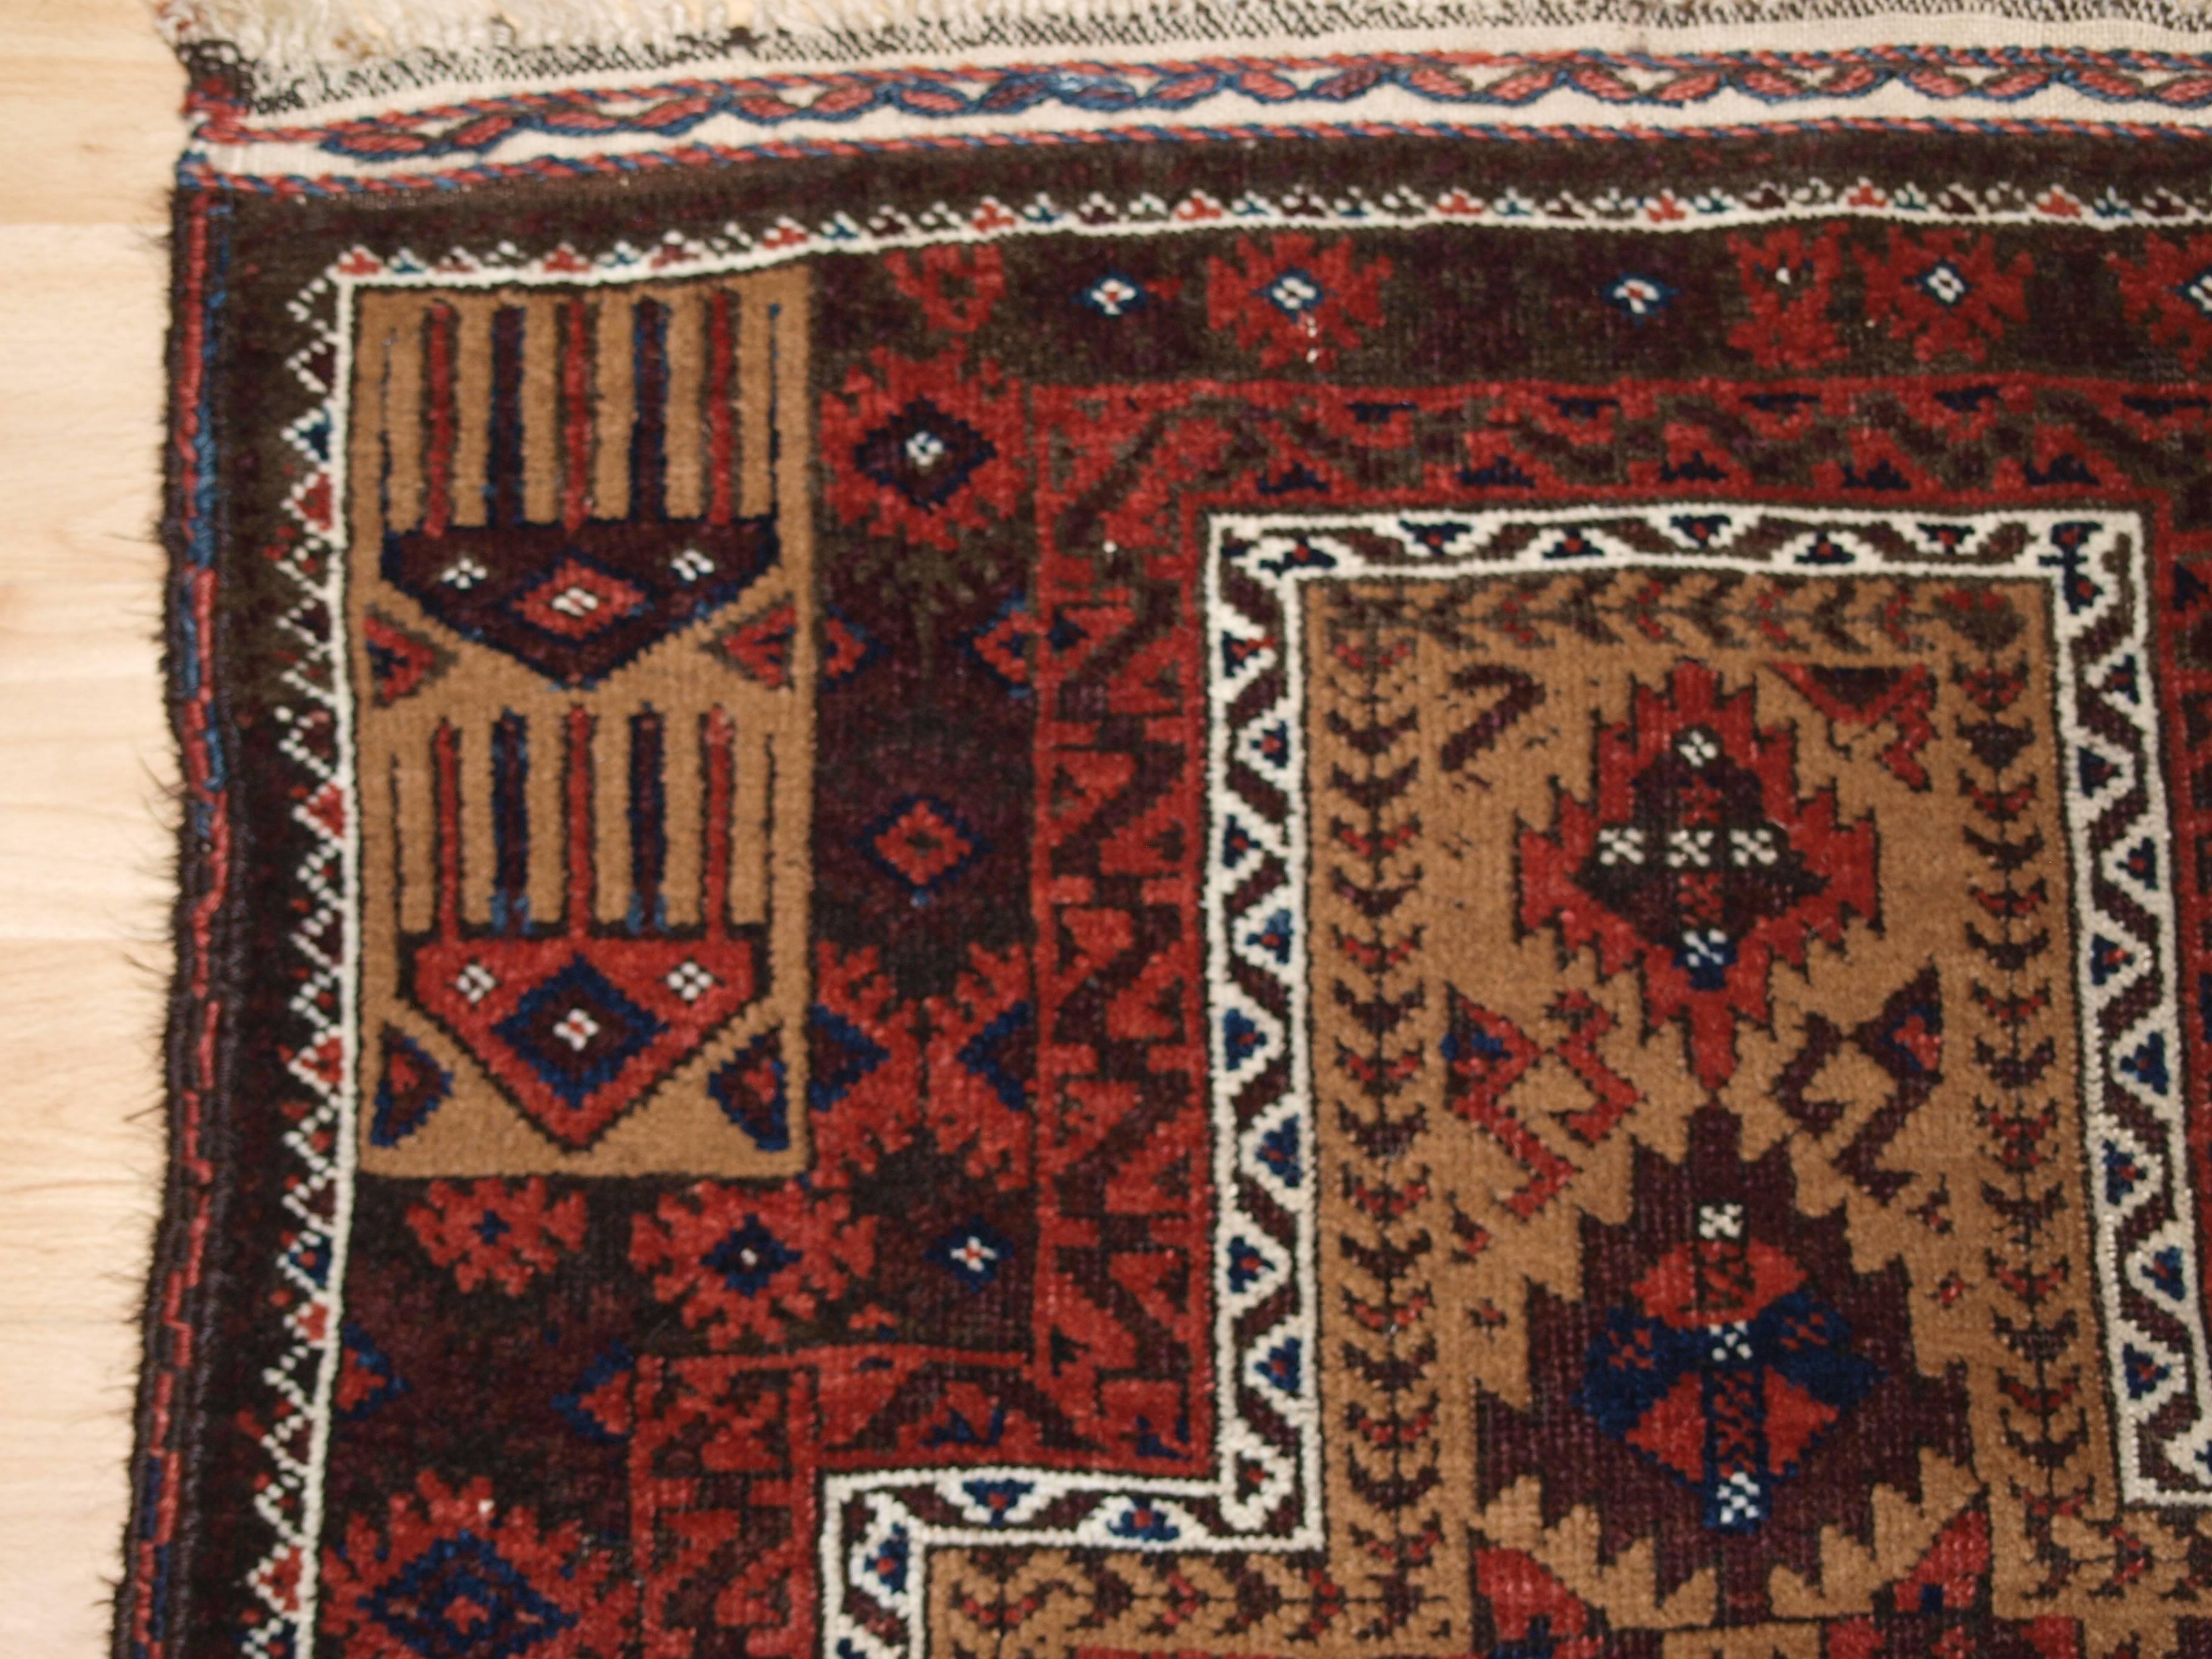 Antique Baluch camel ground prayer rug with interesting Turkmen inspired design. 

Size: 5ft 3in x 2ft 8in (160 x 82cm),

circa 1900.

The rug is beautifully drawn and has excellent color, the camel wool ground is very soft. The rug retains